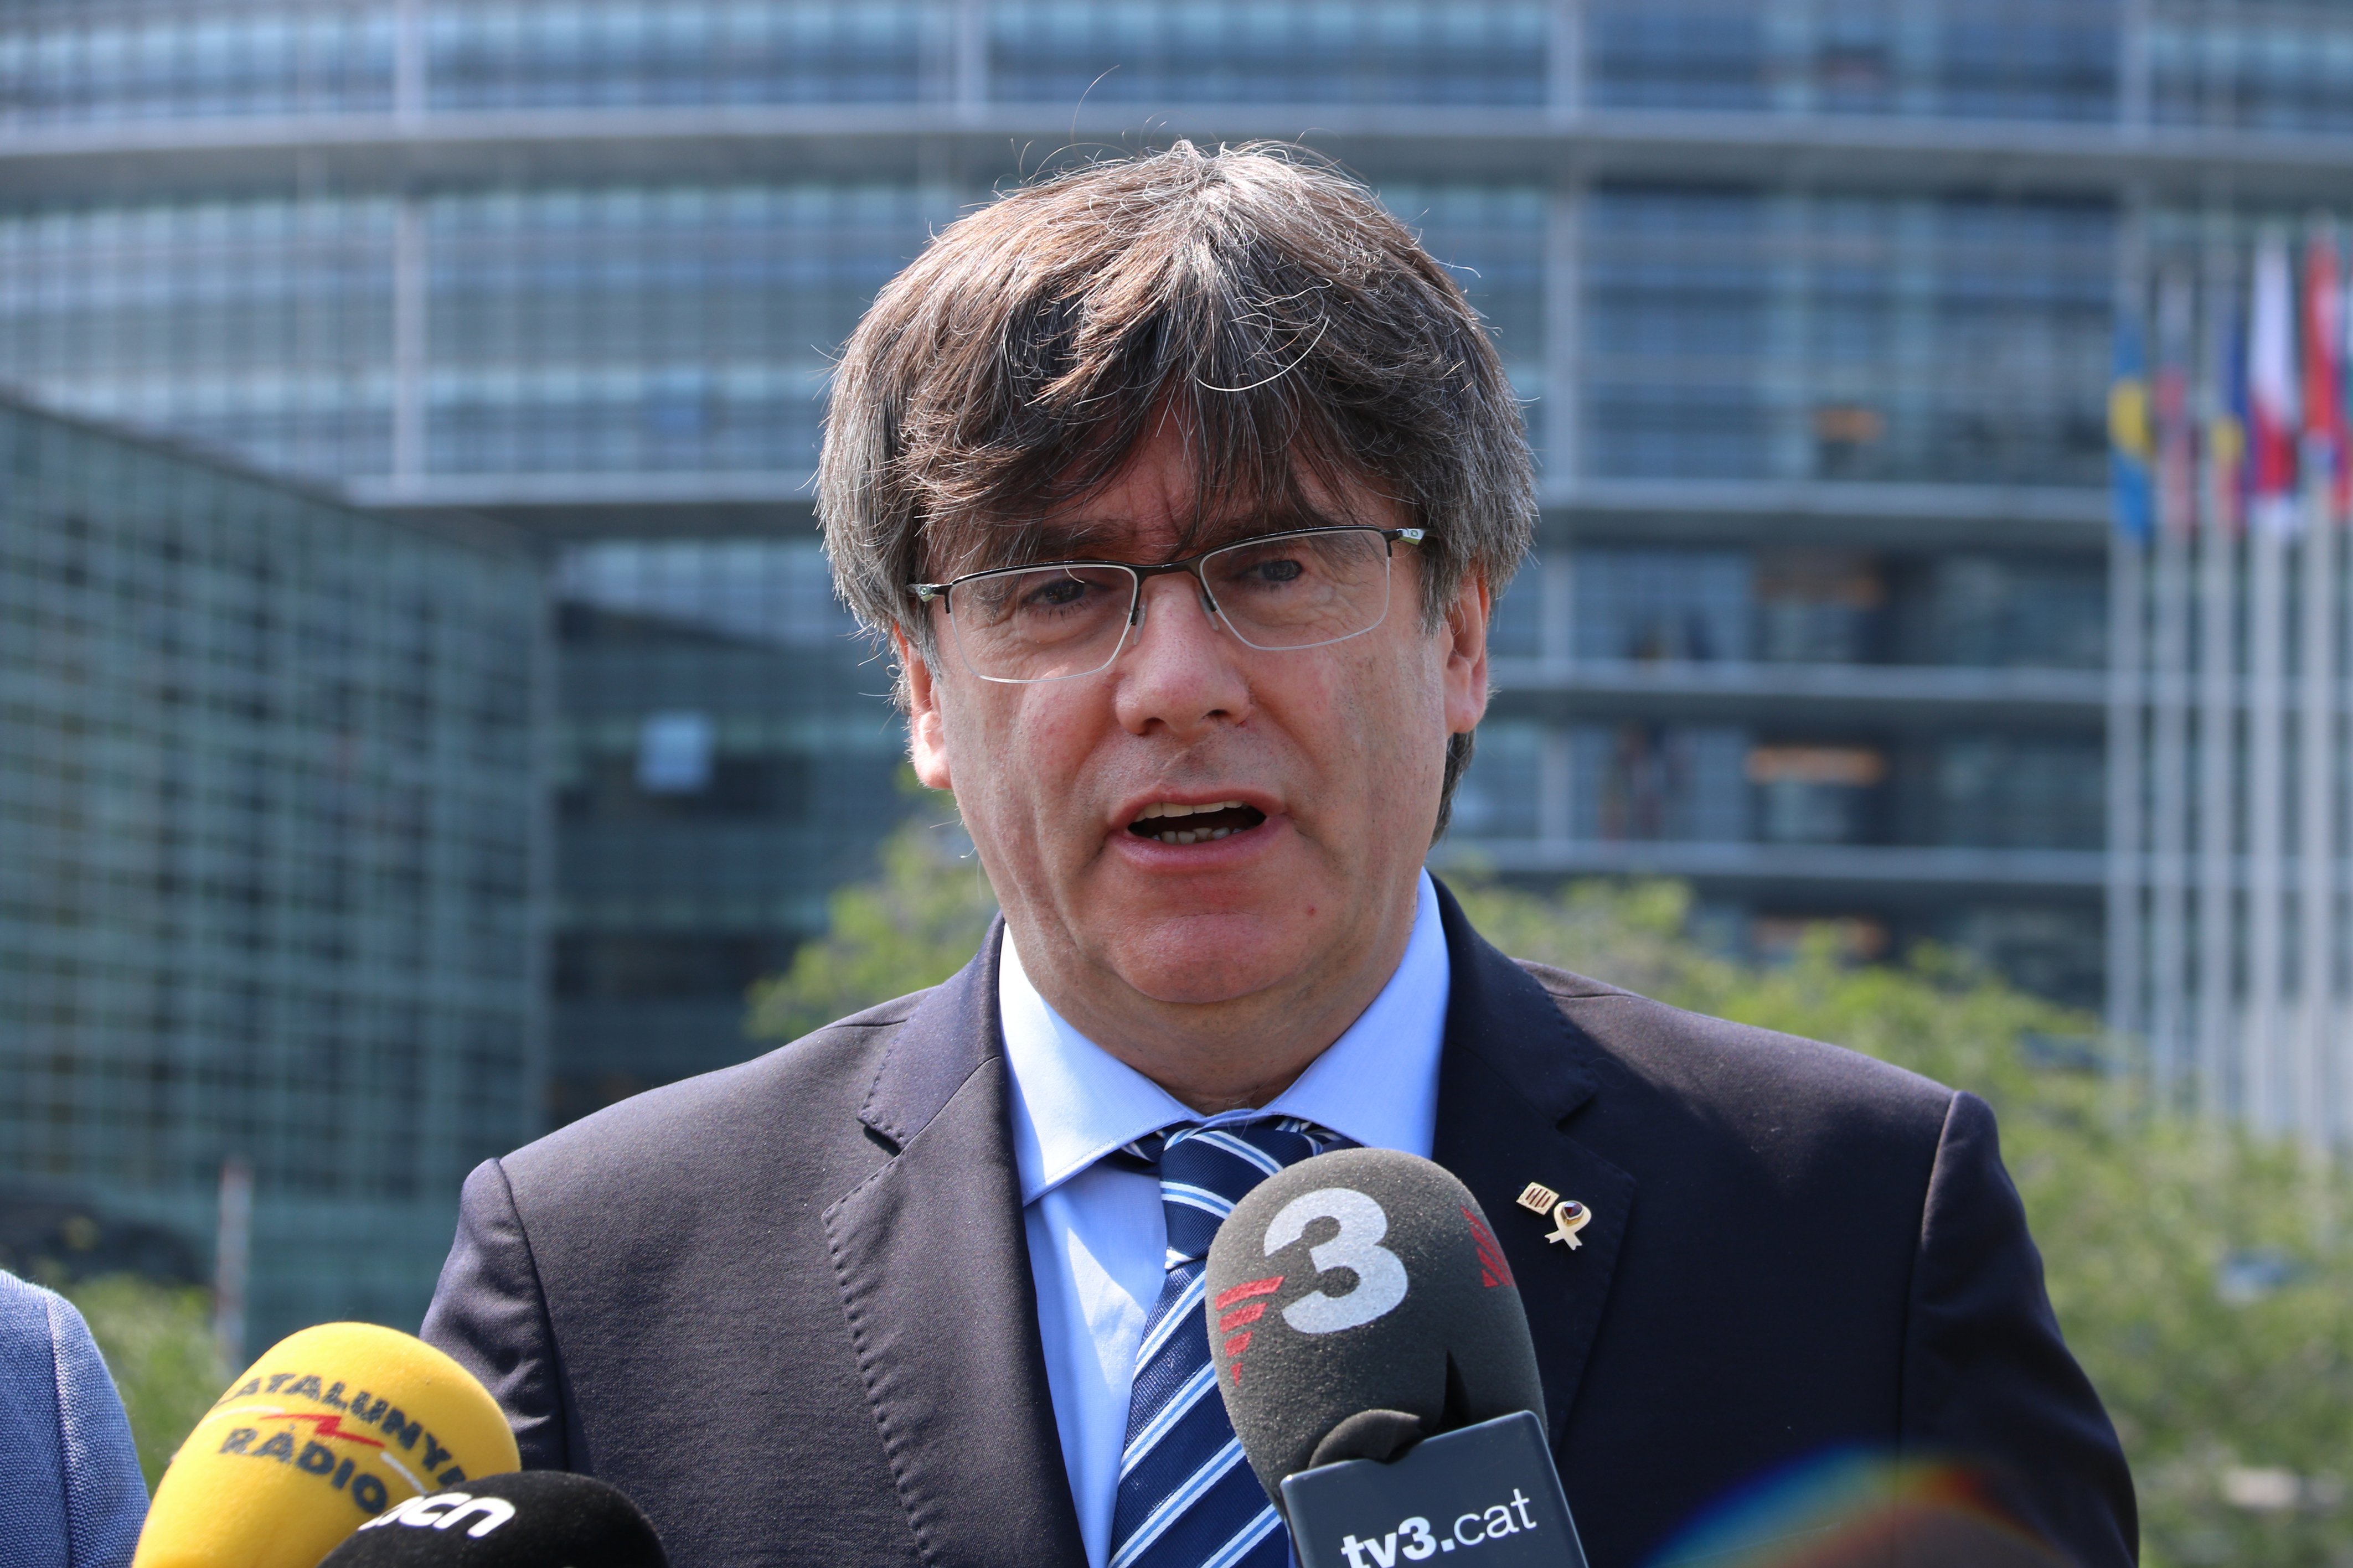 Puigdemont, chosen to form part of the debate on the future of Europe